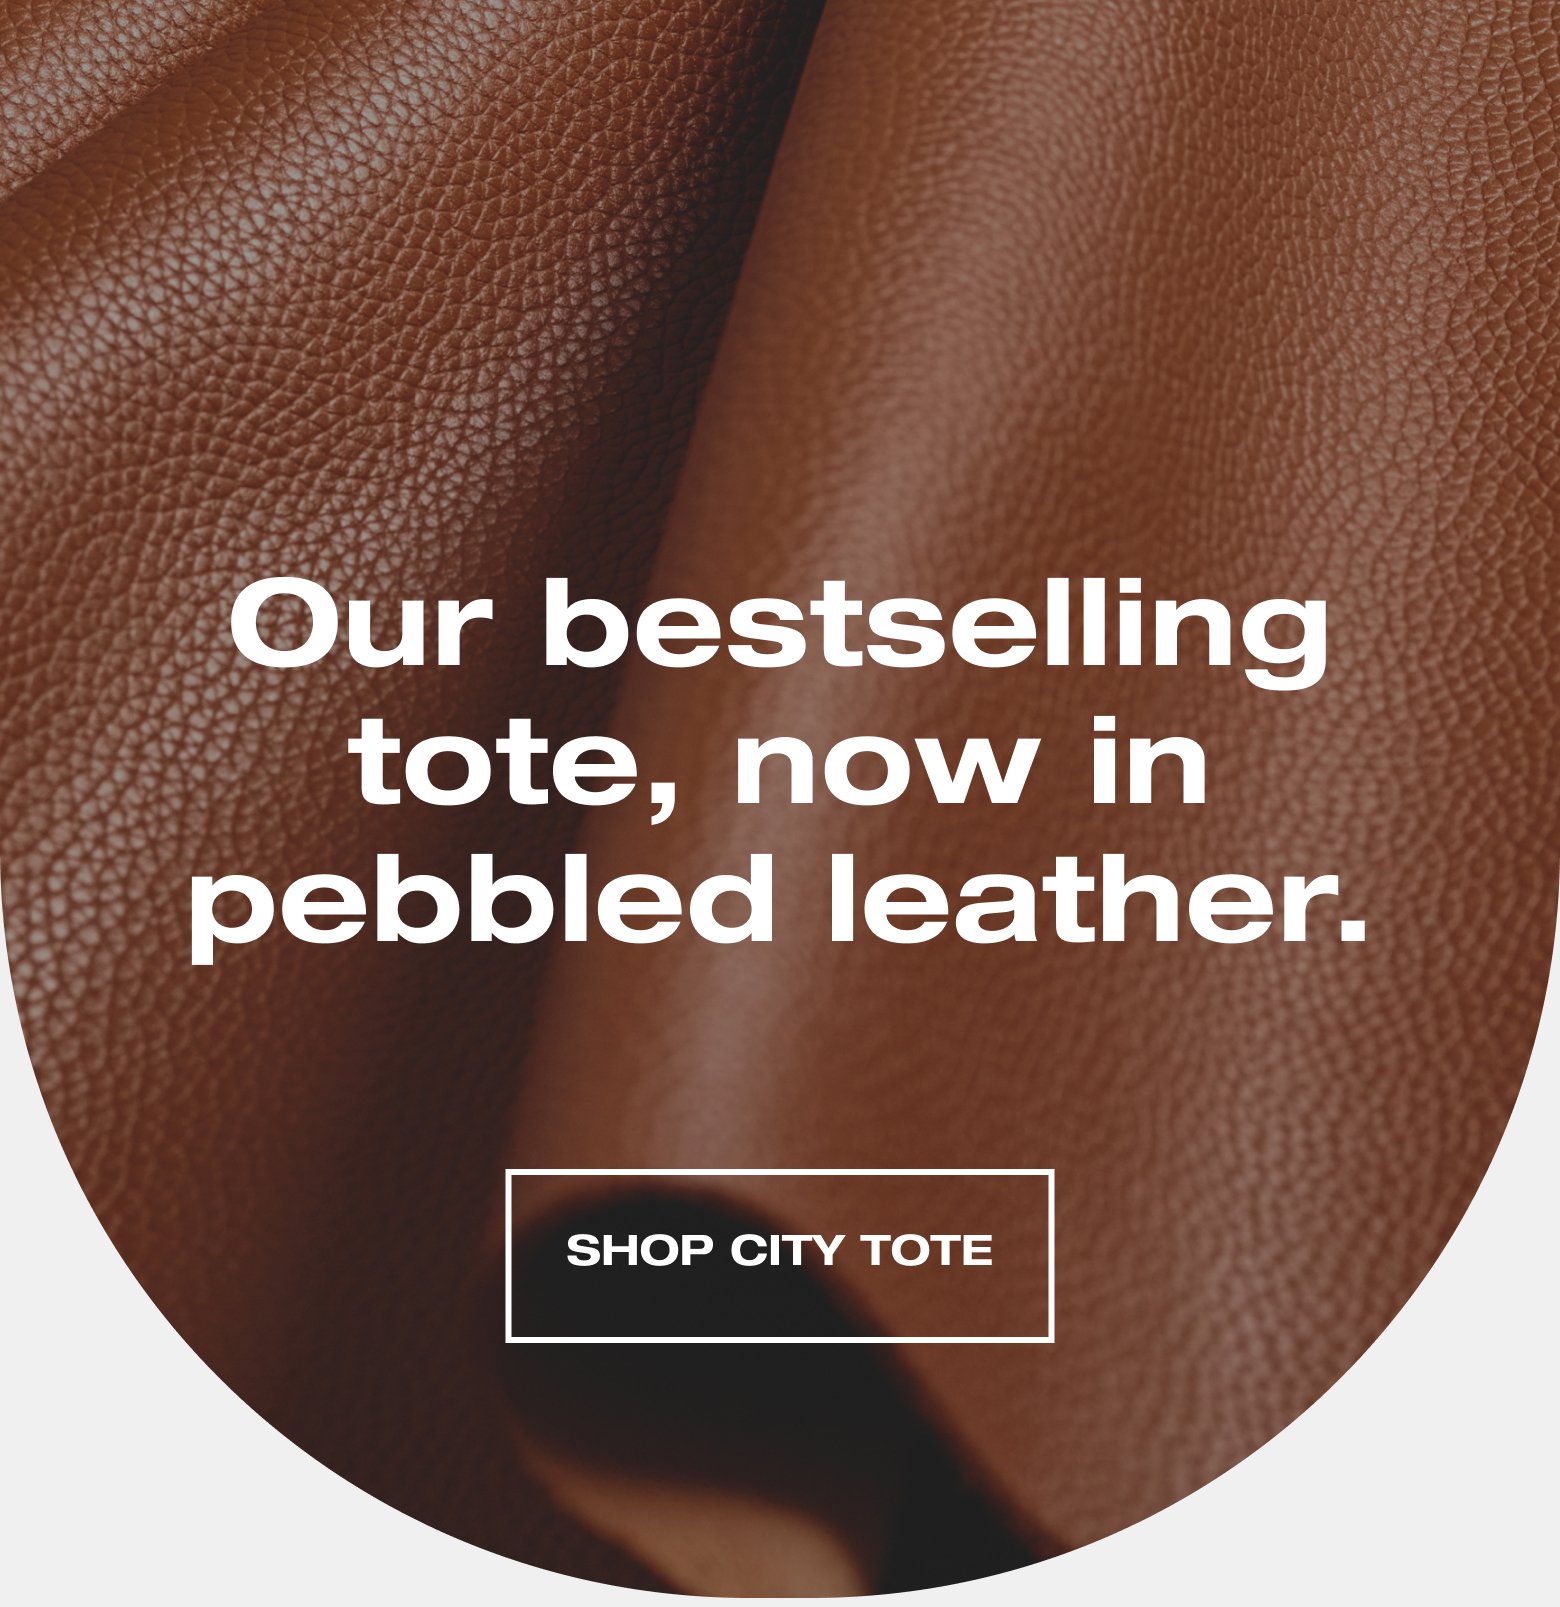 Our bestselling tote, now in pebbled leather. SHOP CITY TOTE